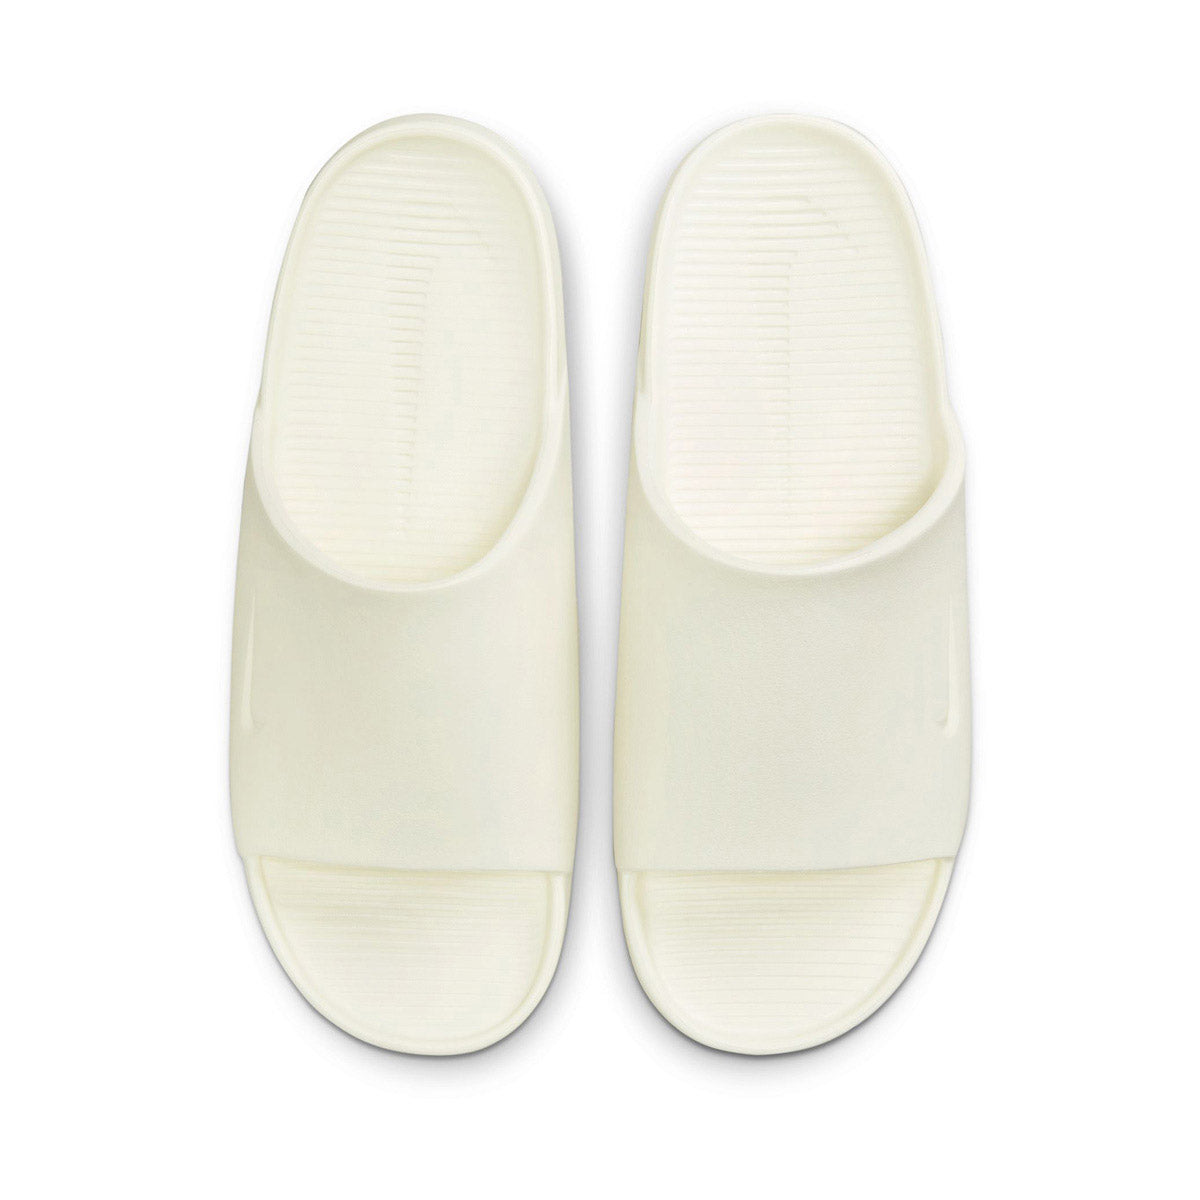 How Does the Nike Calm Slide Compare to the adidas Yeezy Slide